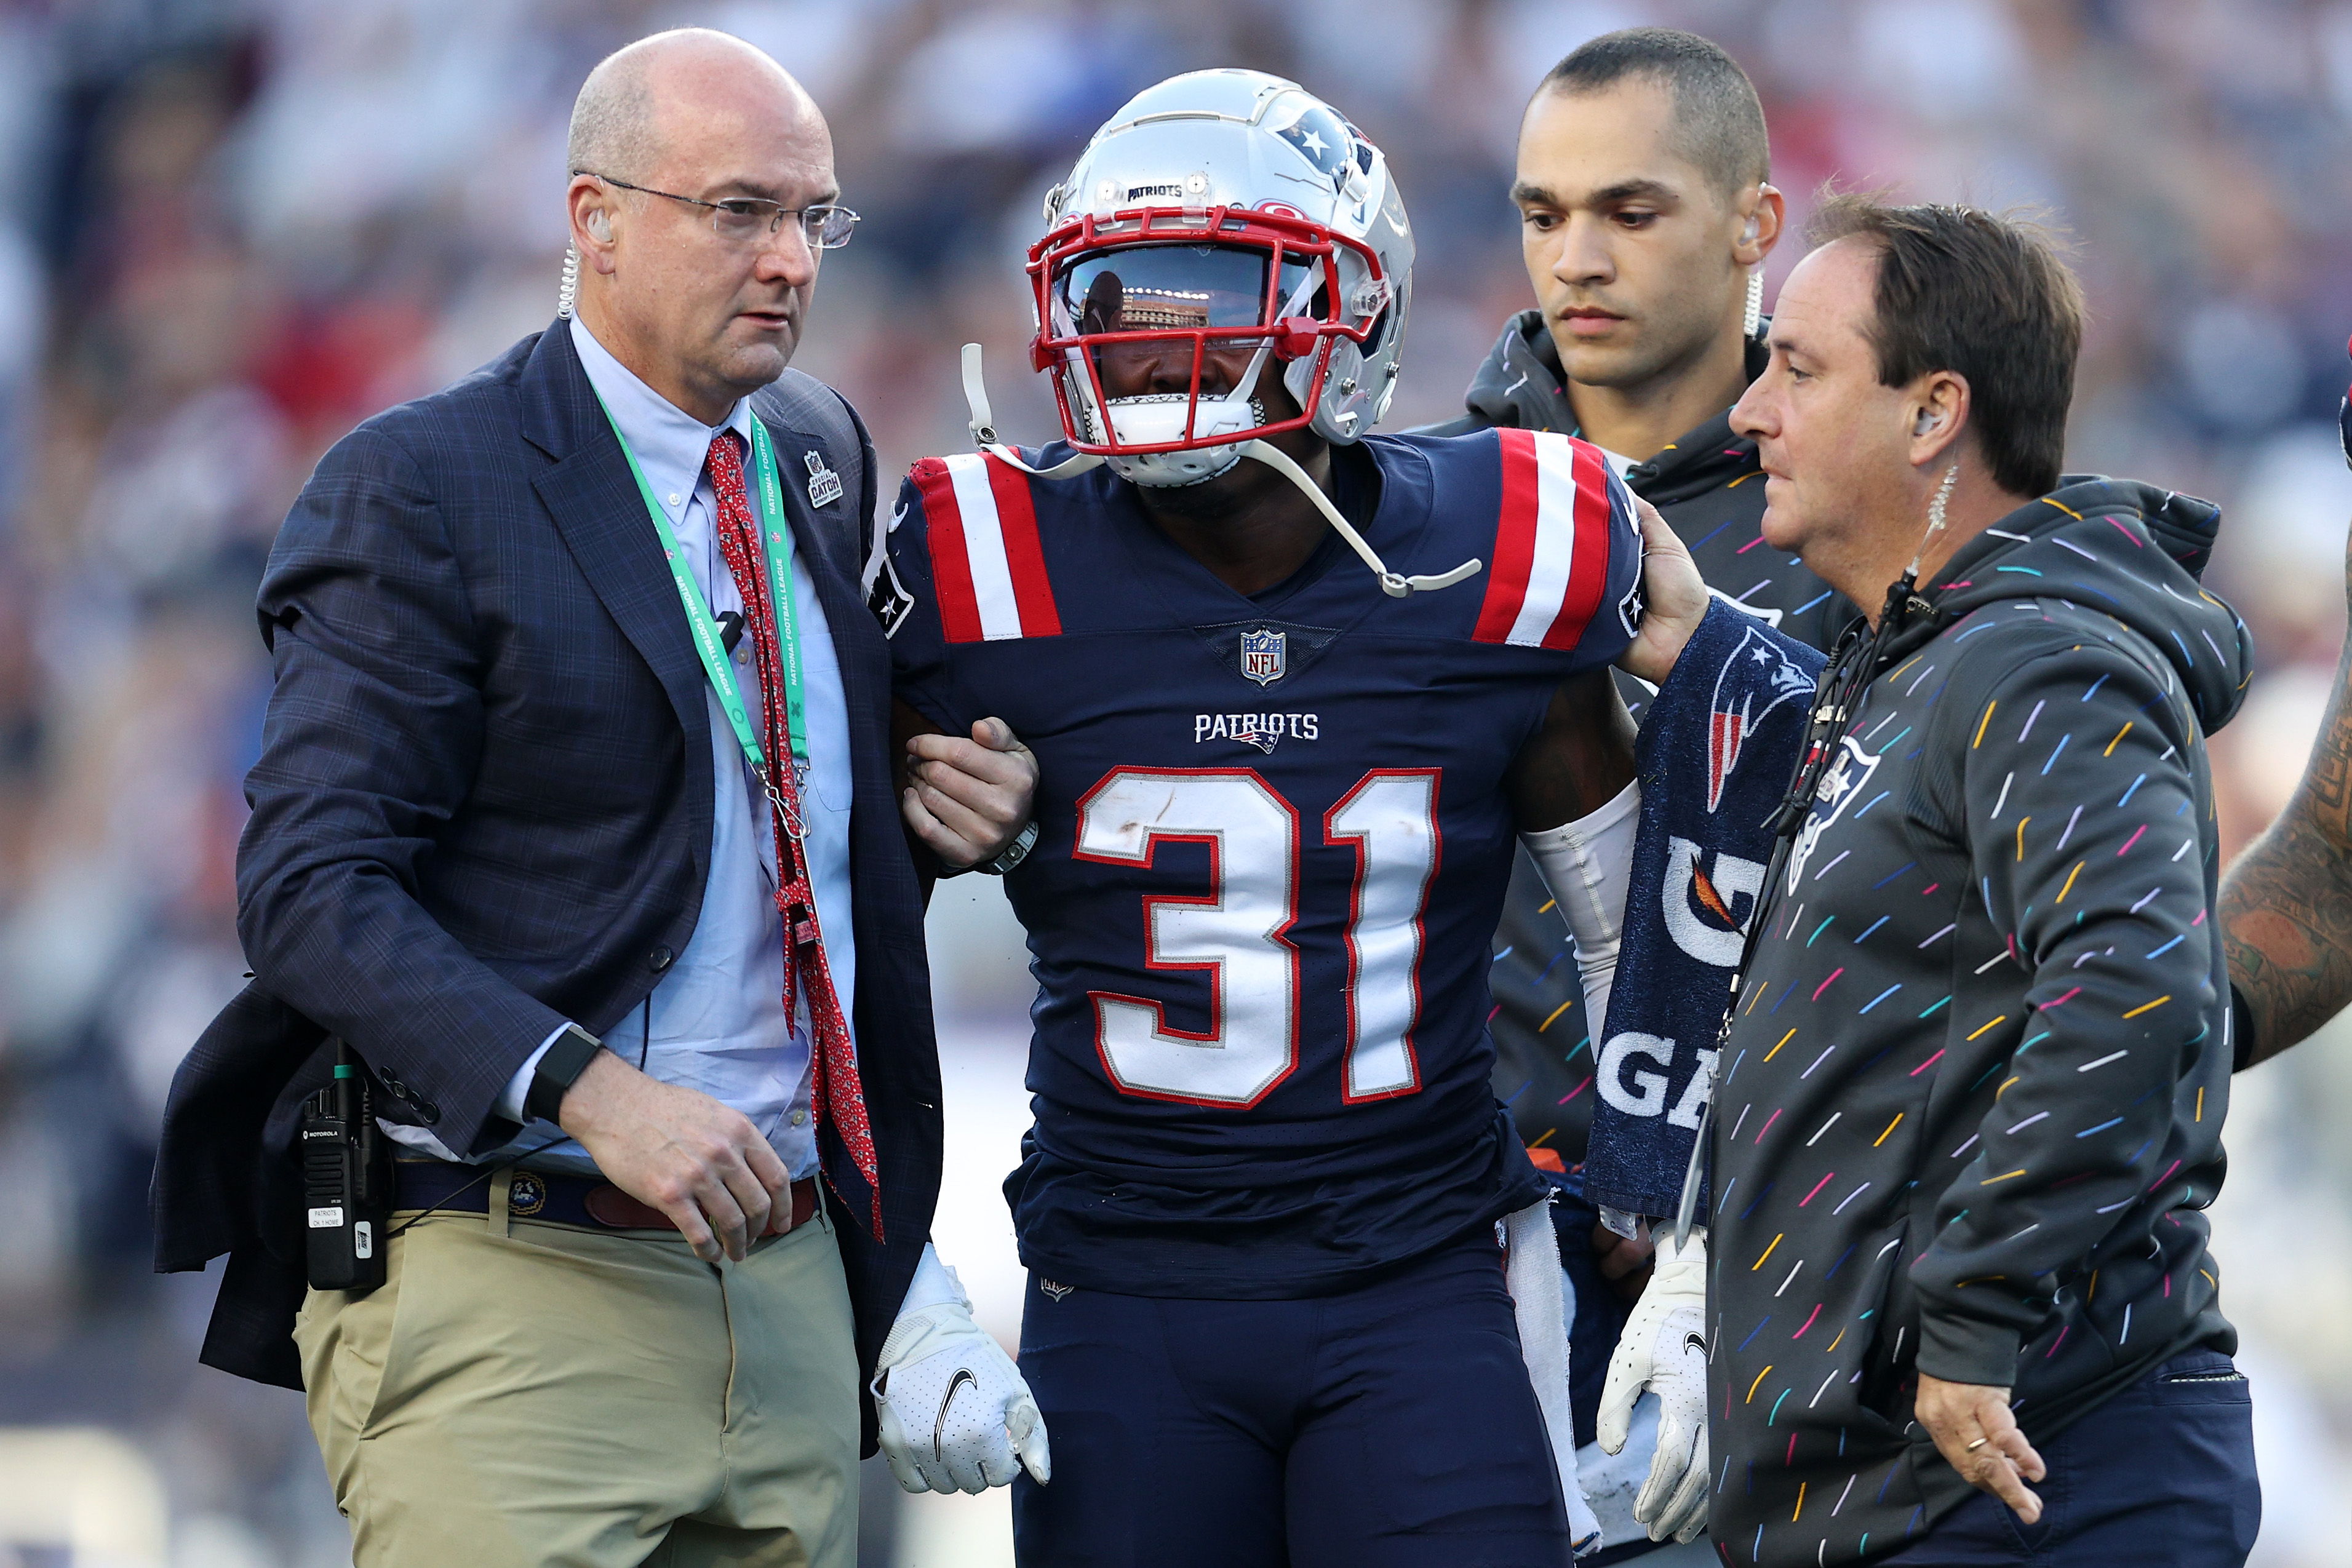 Jonathan Jones #31 of the New England Patriots is helped off the field after being injured in the first quarter against the Dallas Cowboys.